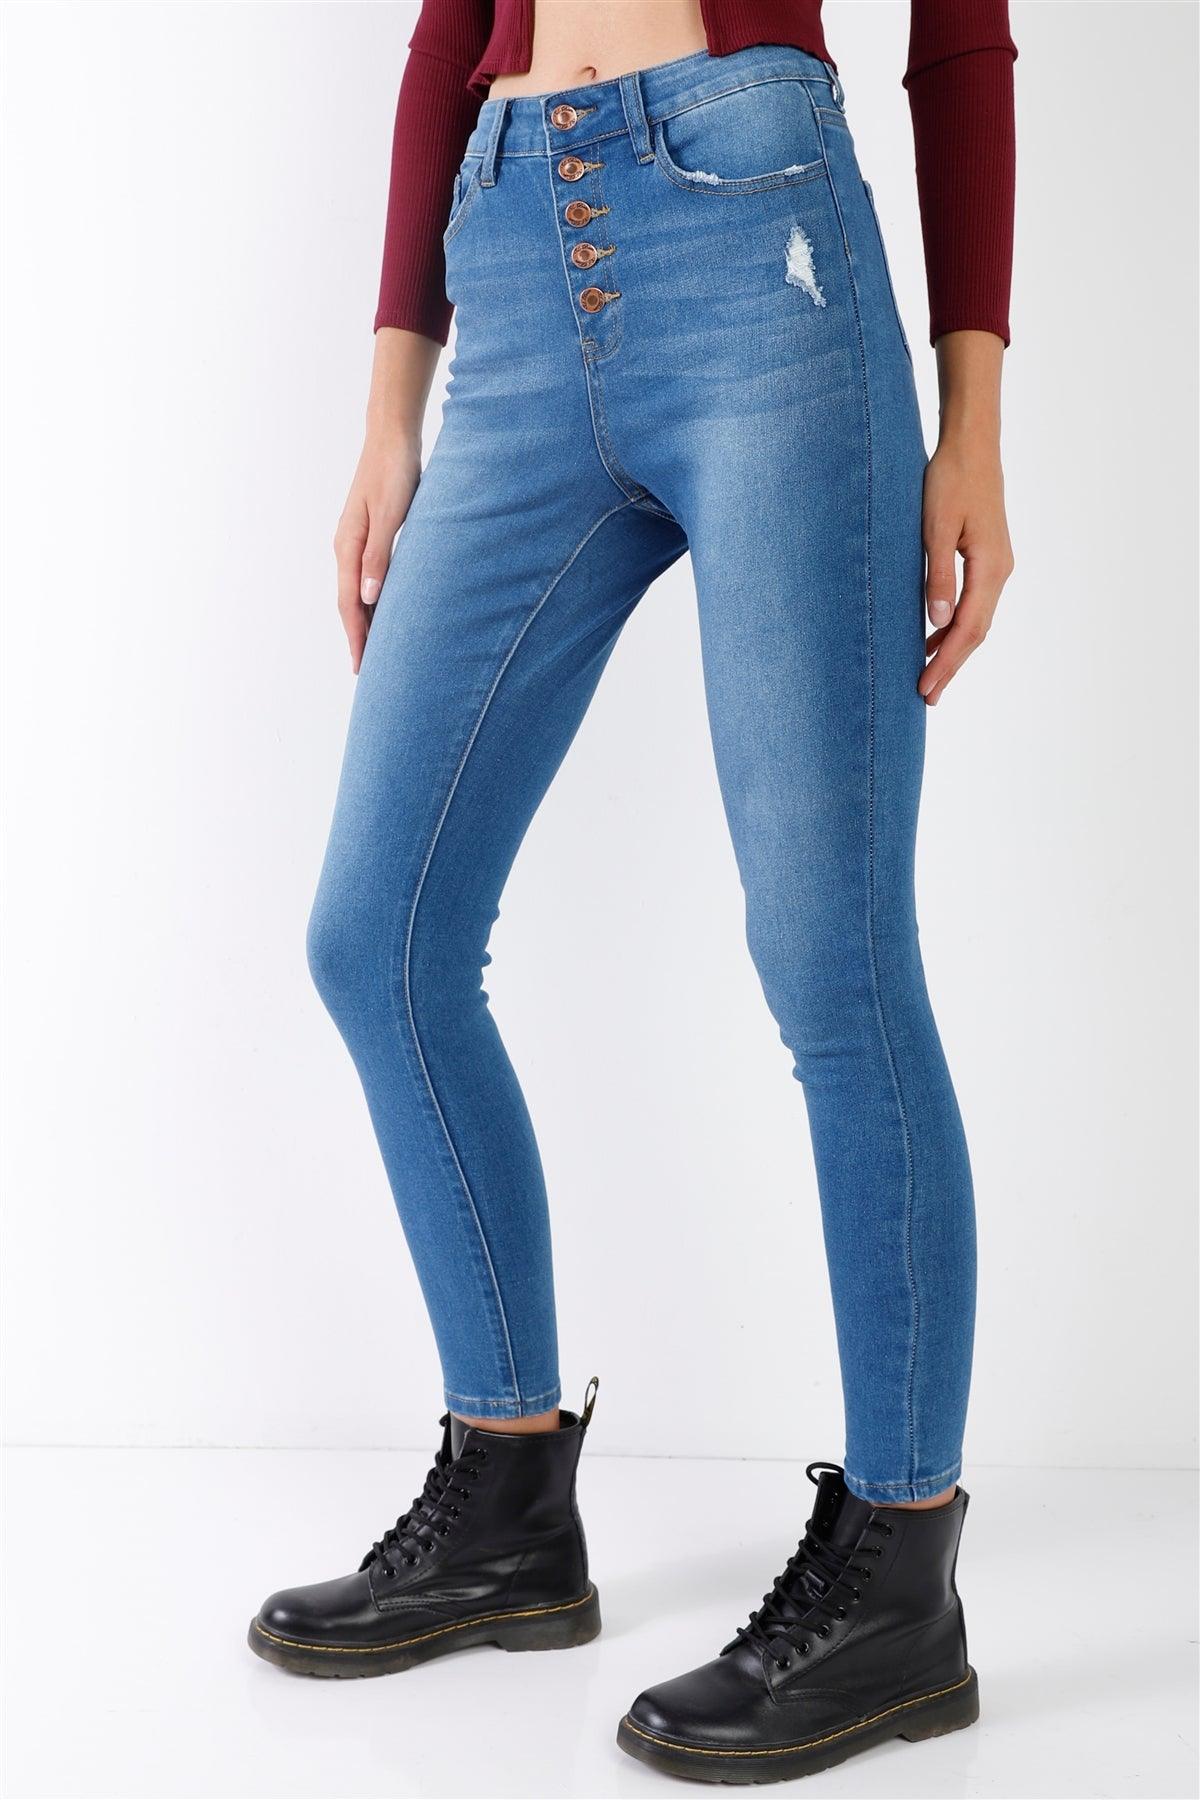 Mid Blue High-Waisted Button Fly Skinny Denim Jeans /1-1-3-2-2-1-1